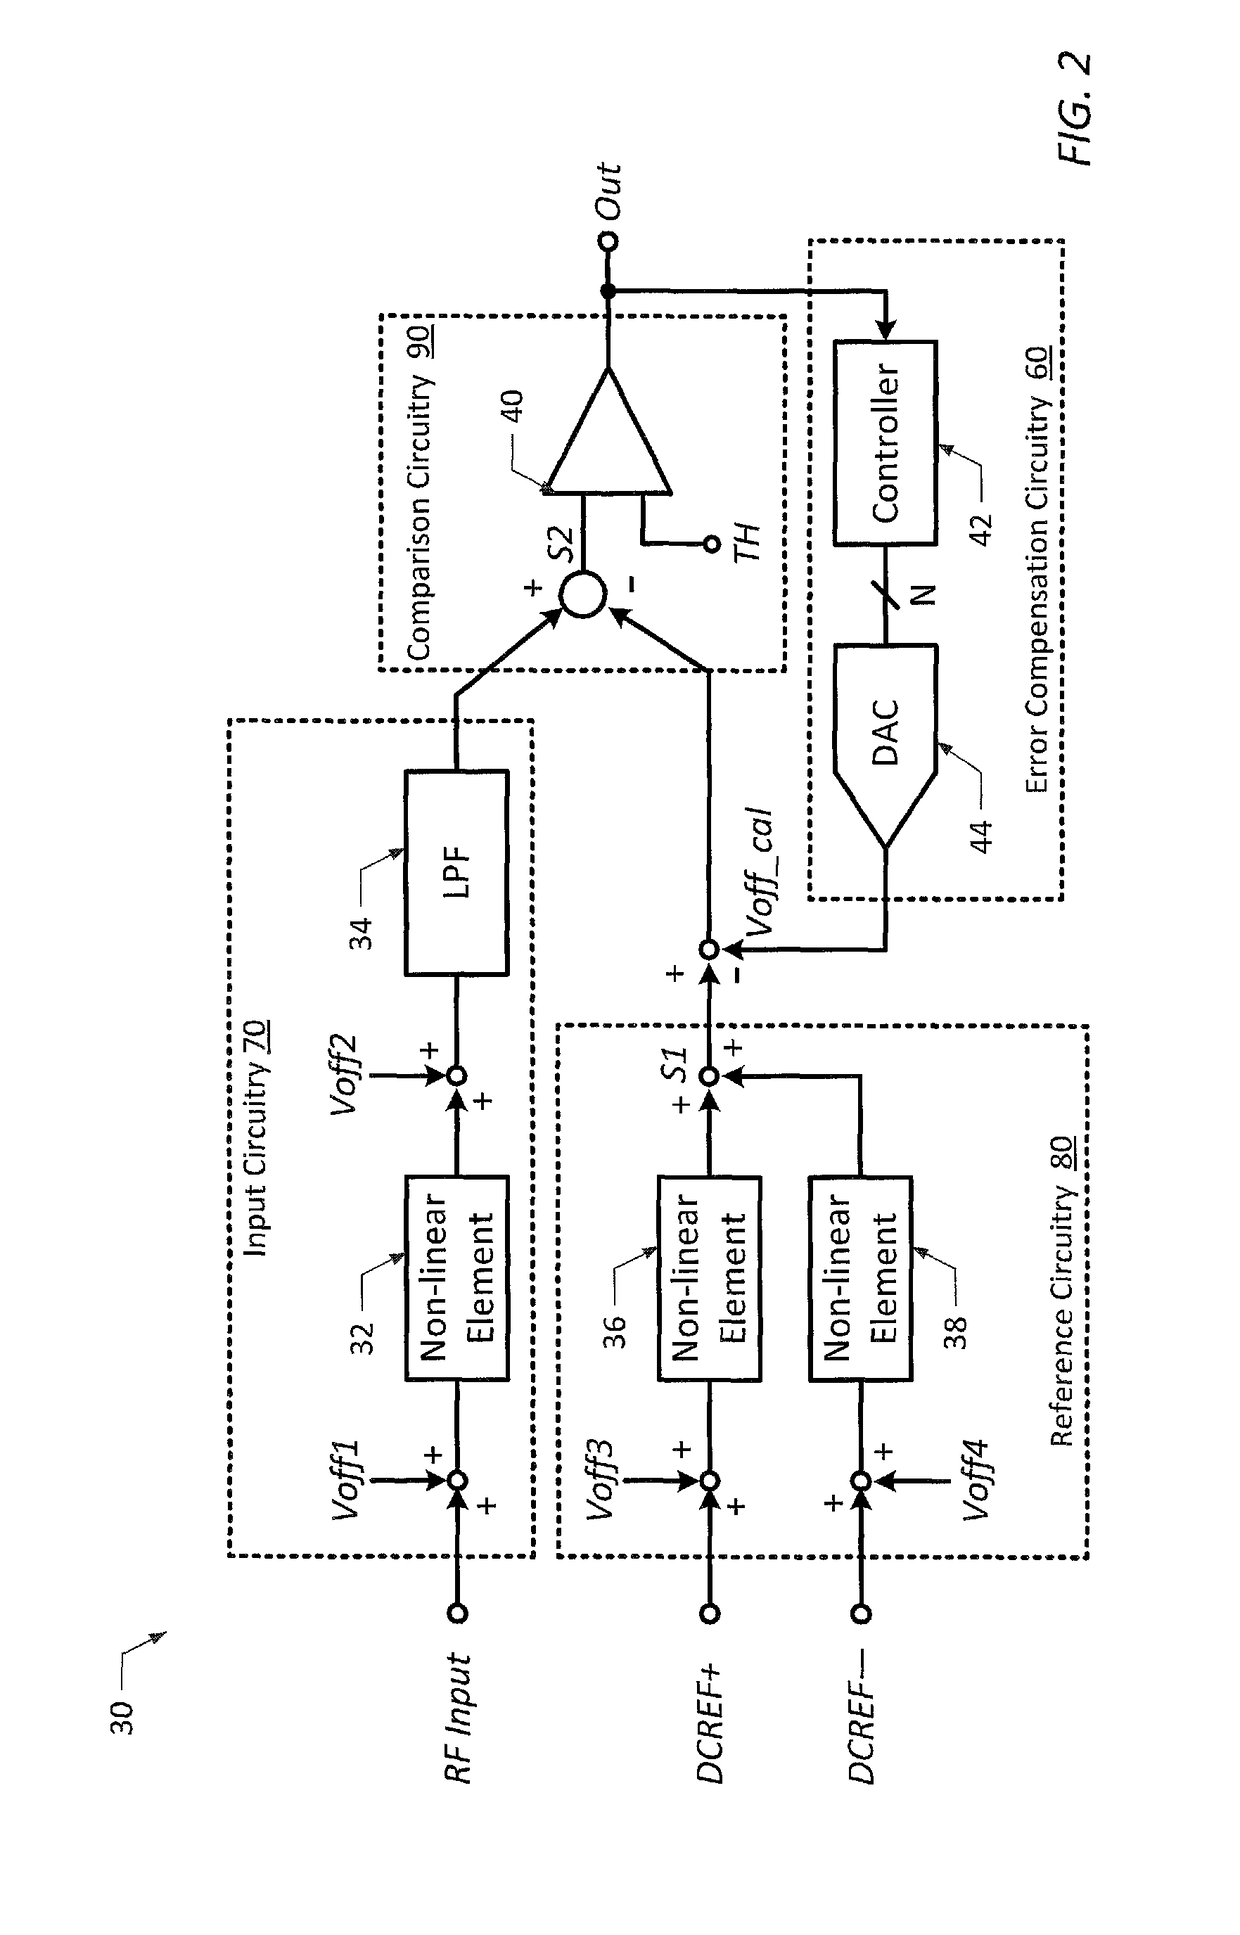 Accurate, low-power power detector circuits and related methods